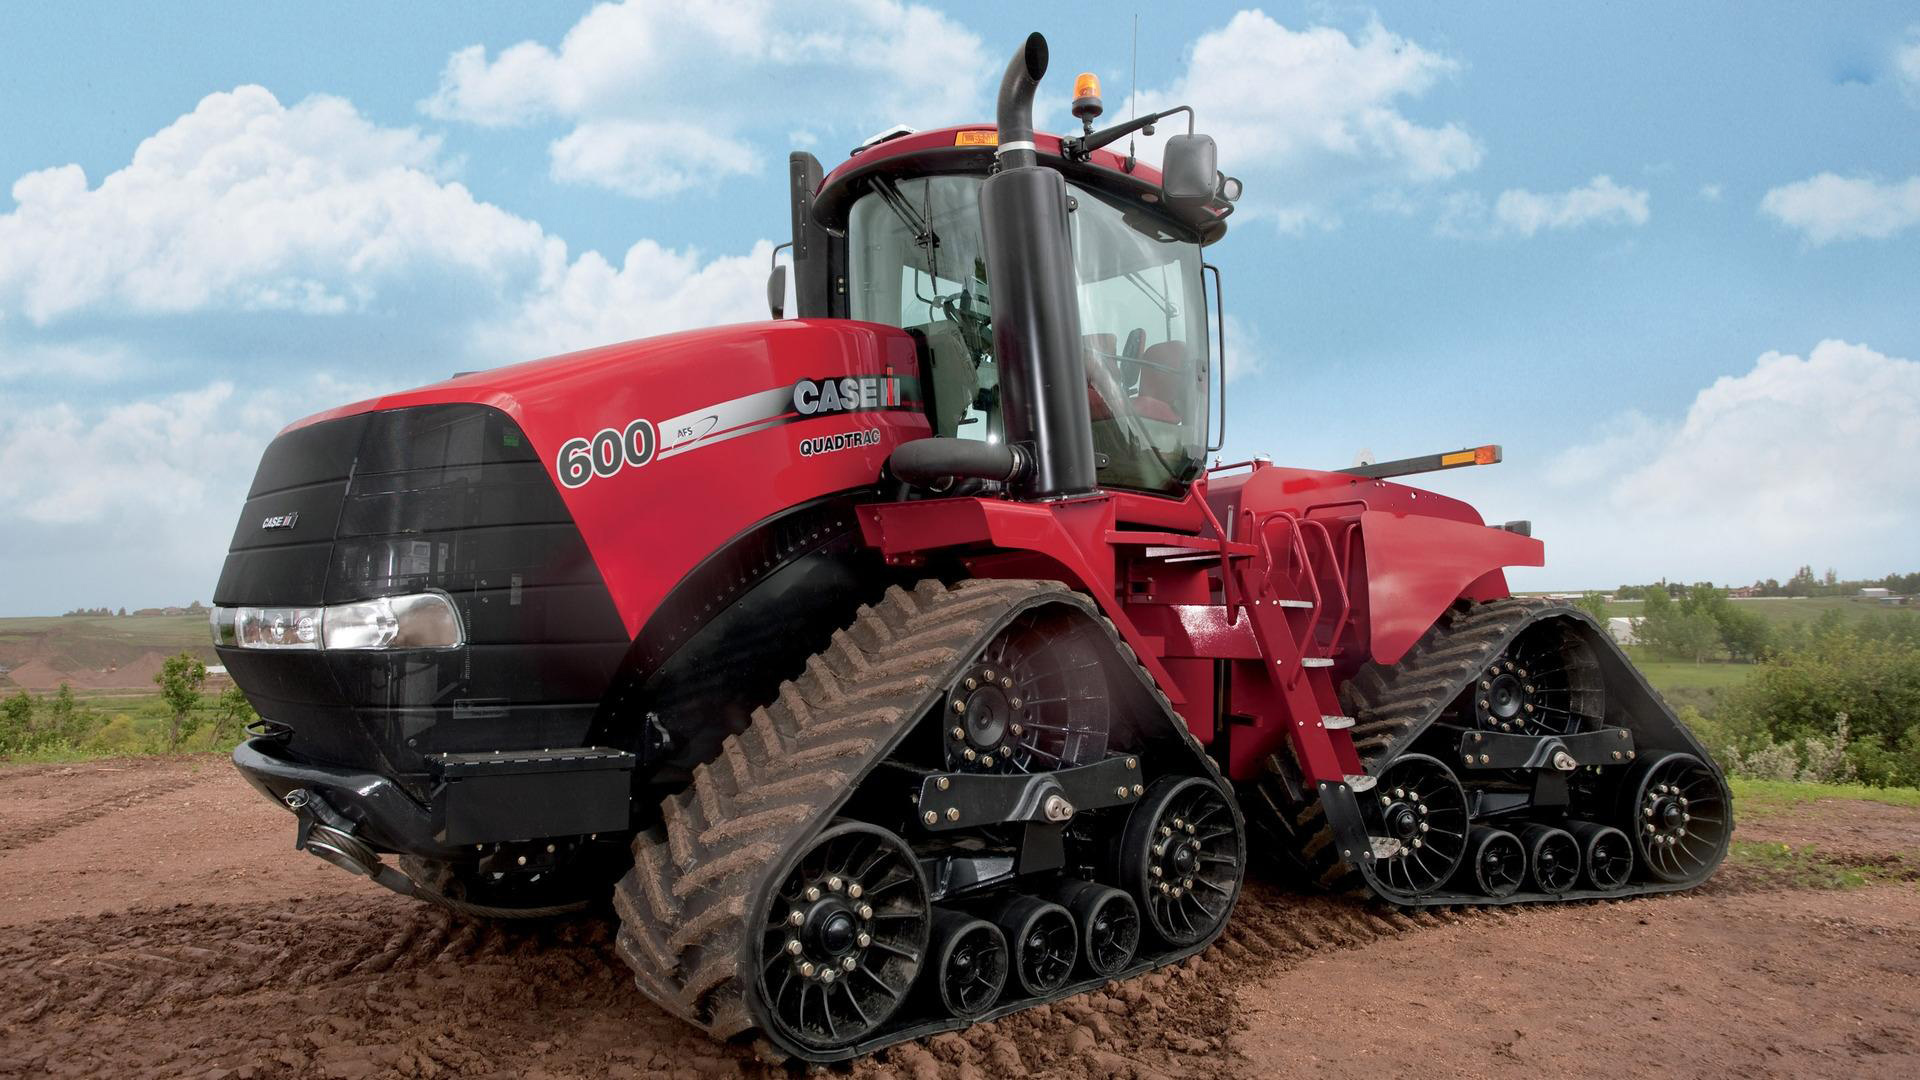 case ih wallpaper,land vehicle,vehicle,tractor,agricultural machinery,mode of transport